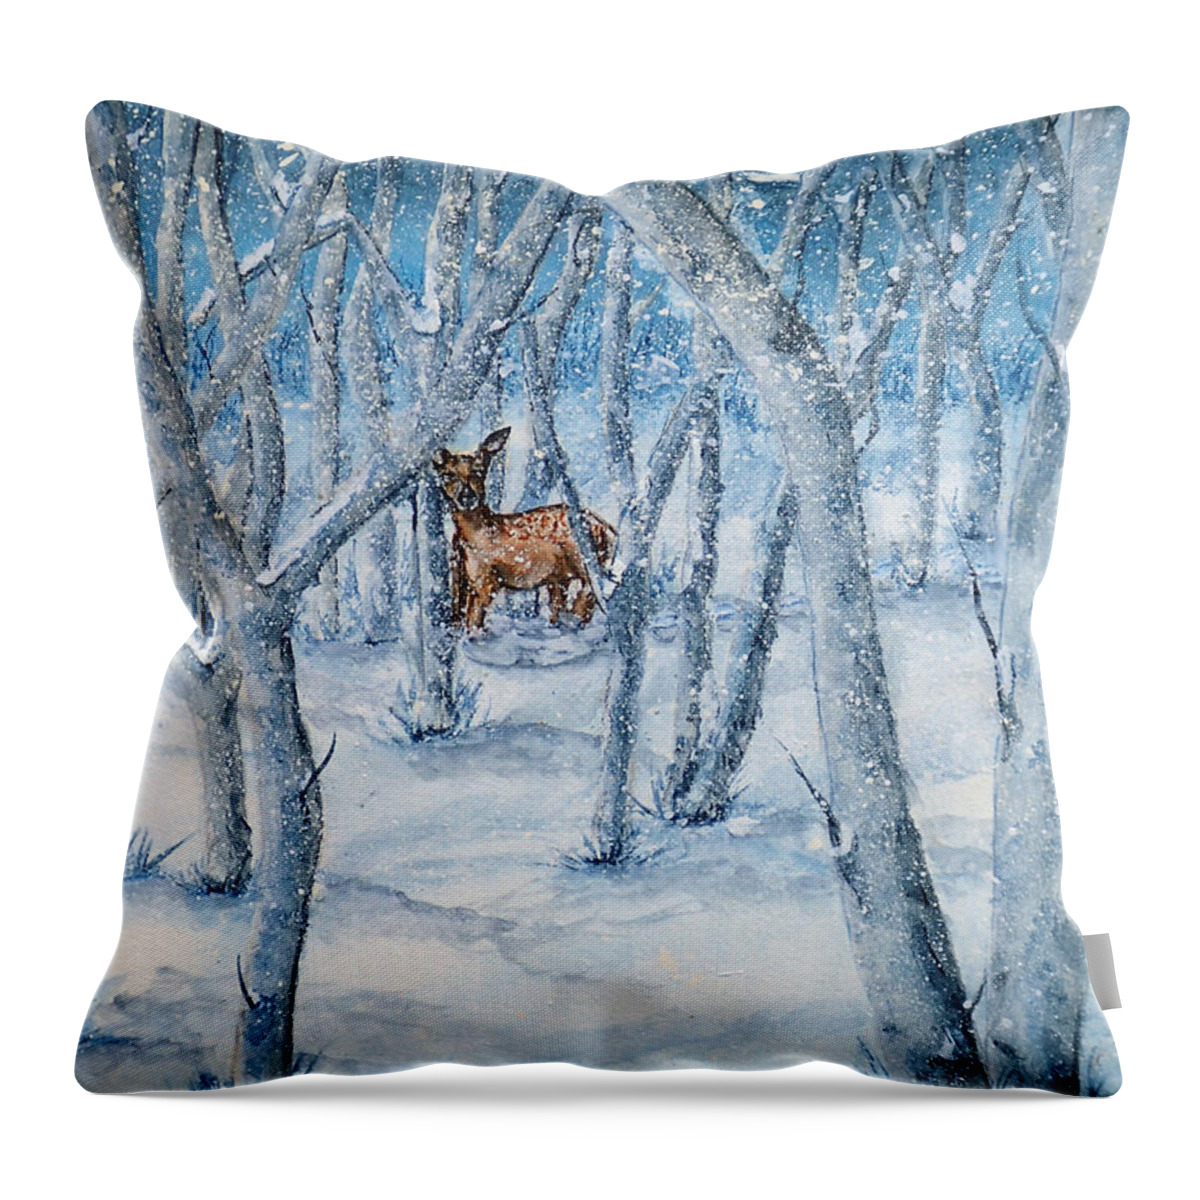 Deer Throw Pillow featuring the painting Winter Snow Embraces a Deer by Kelly Mills